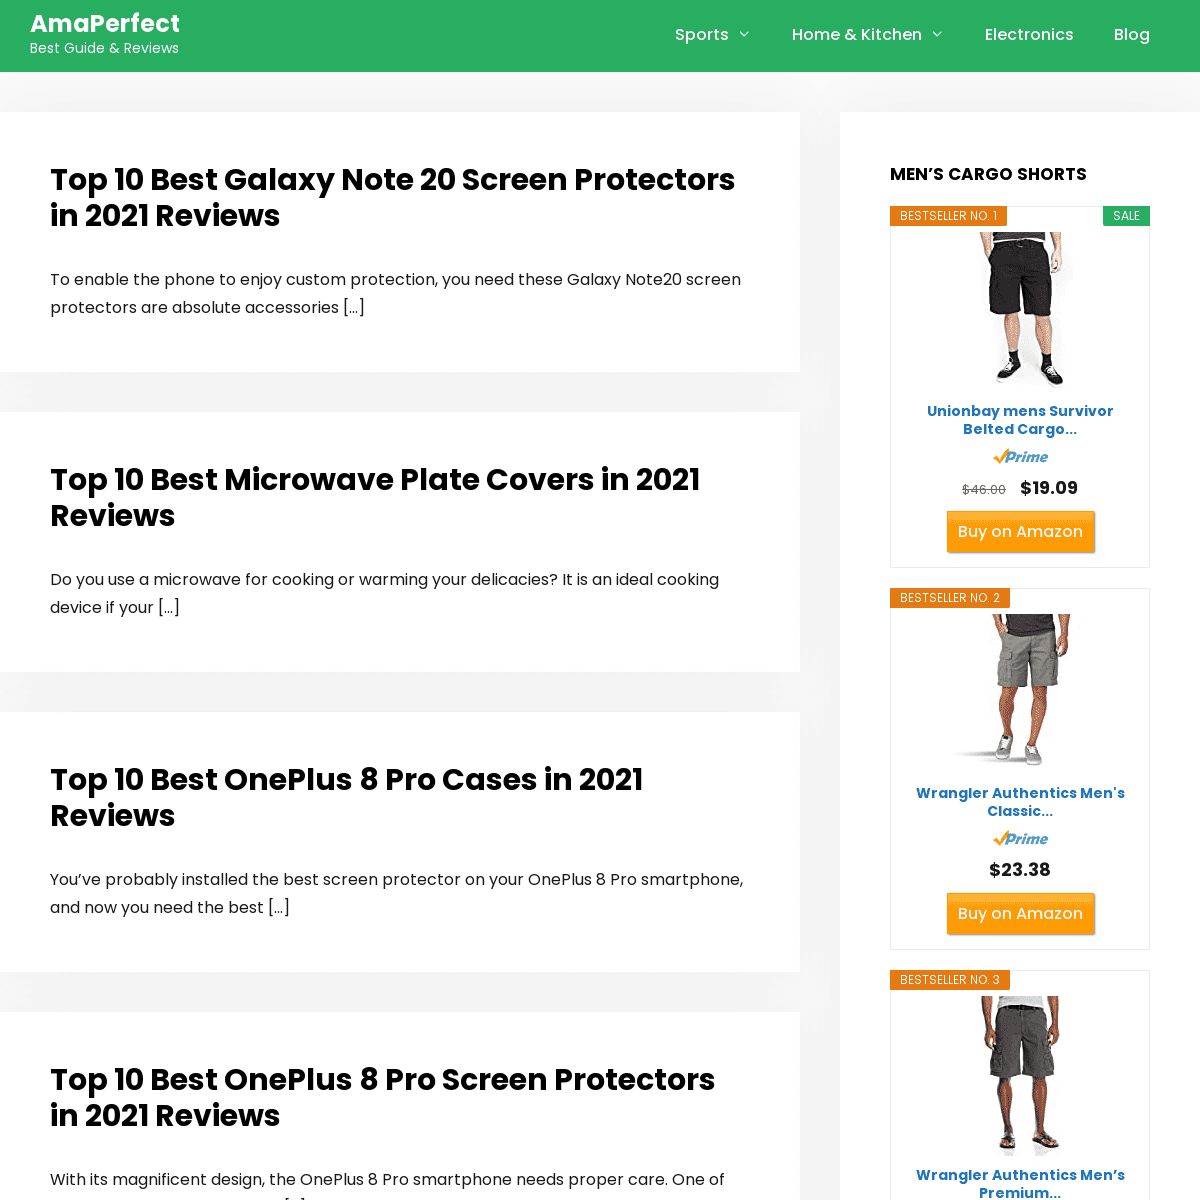 A complete backup of https://amaperfect.com